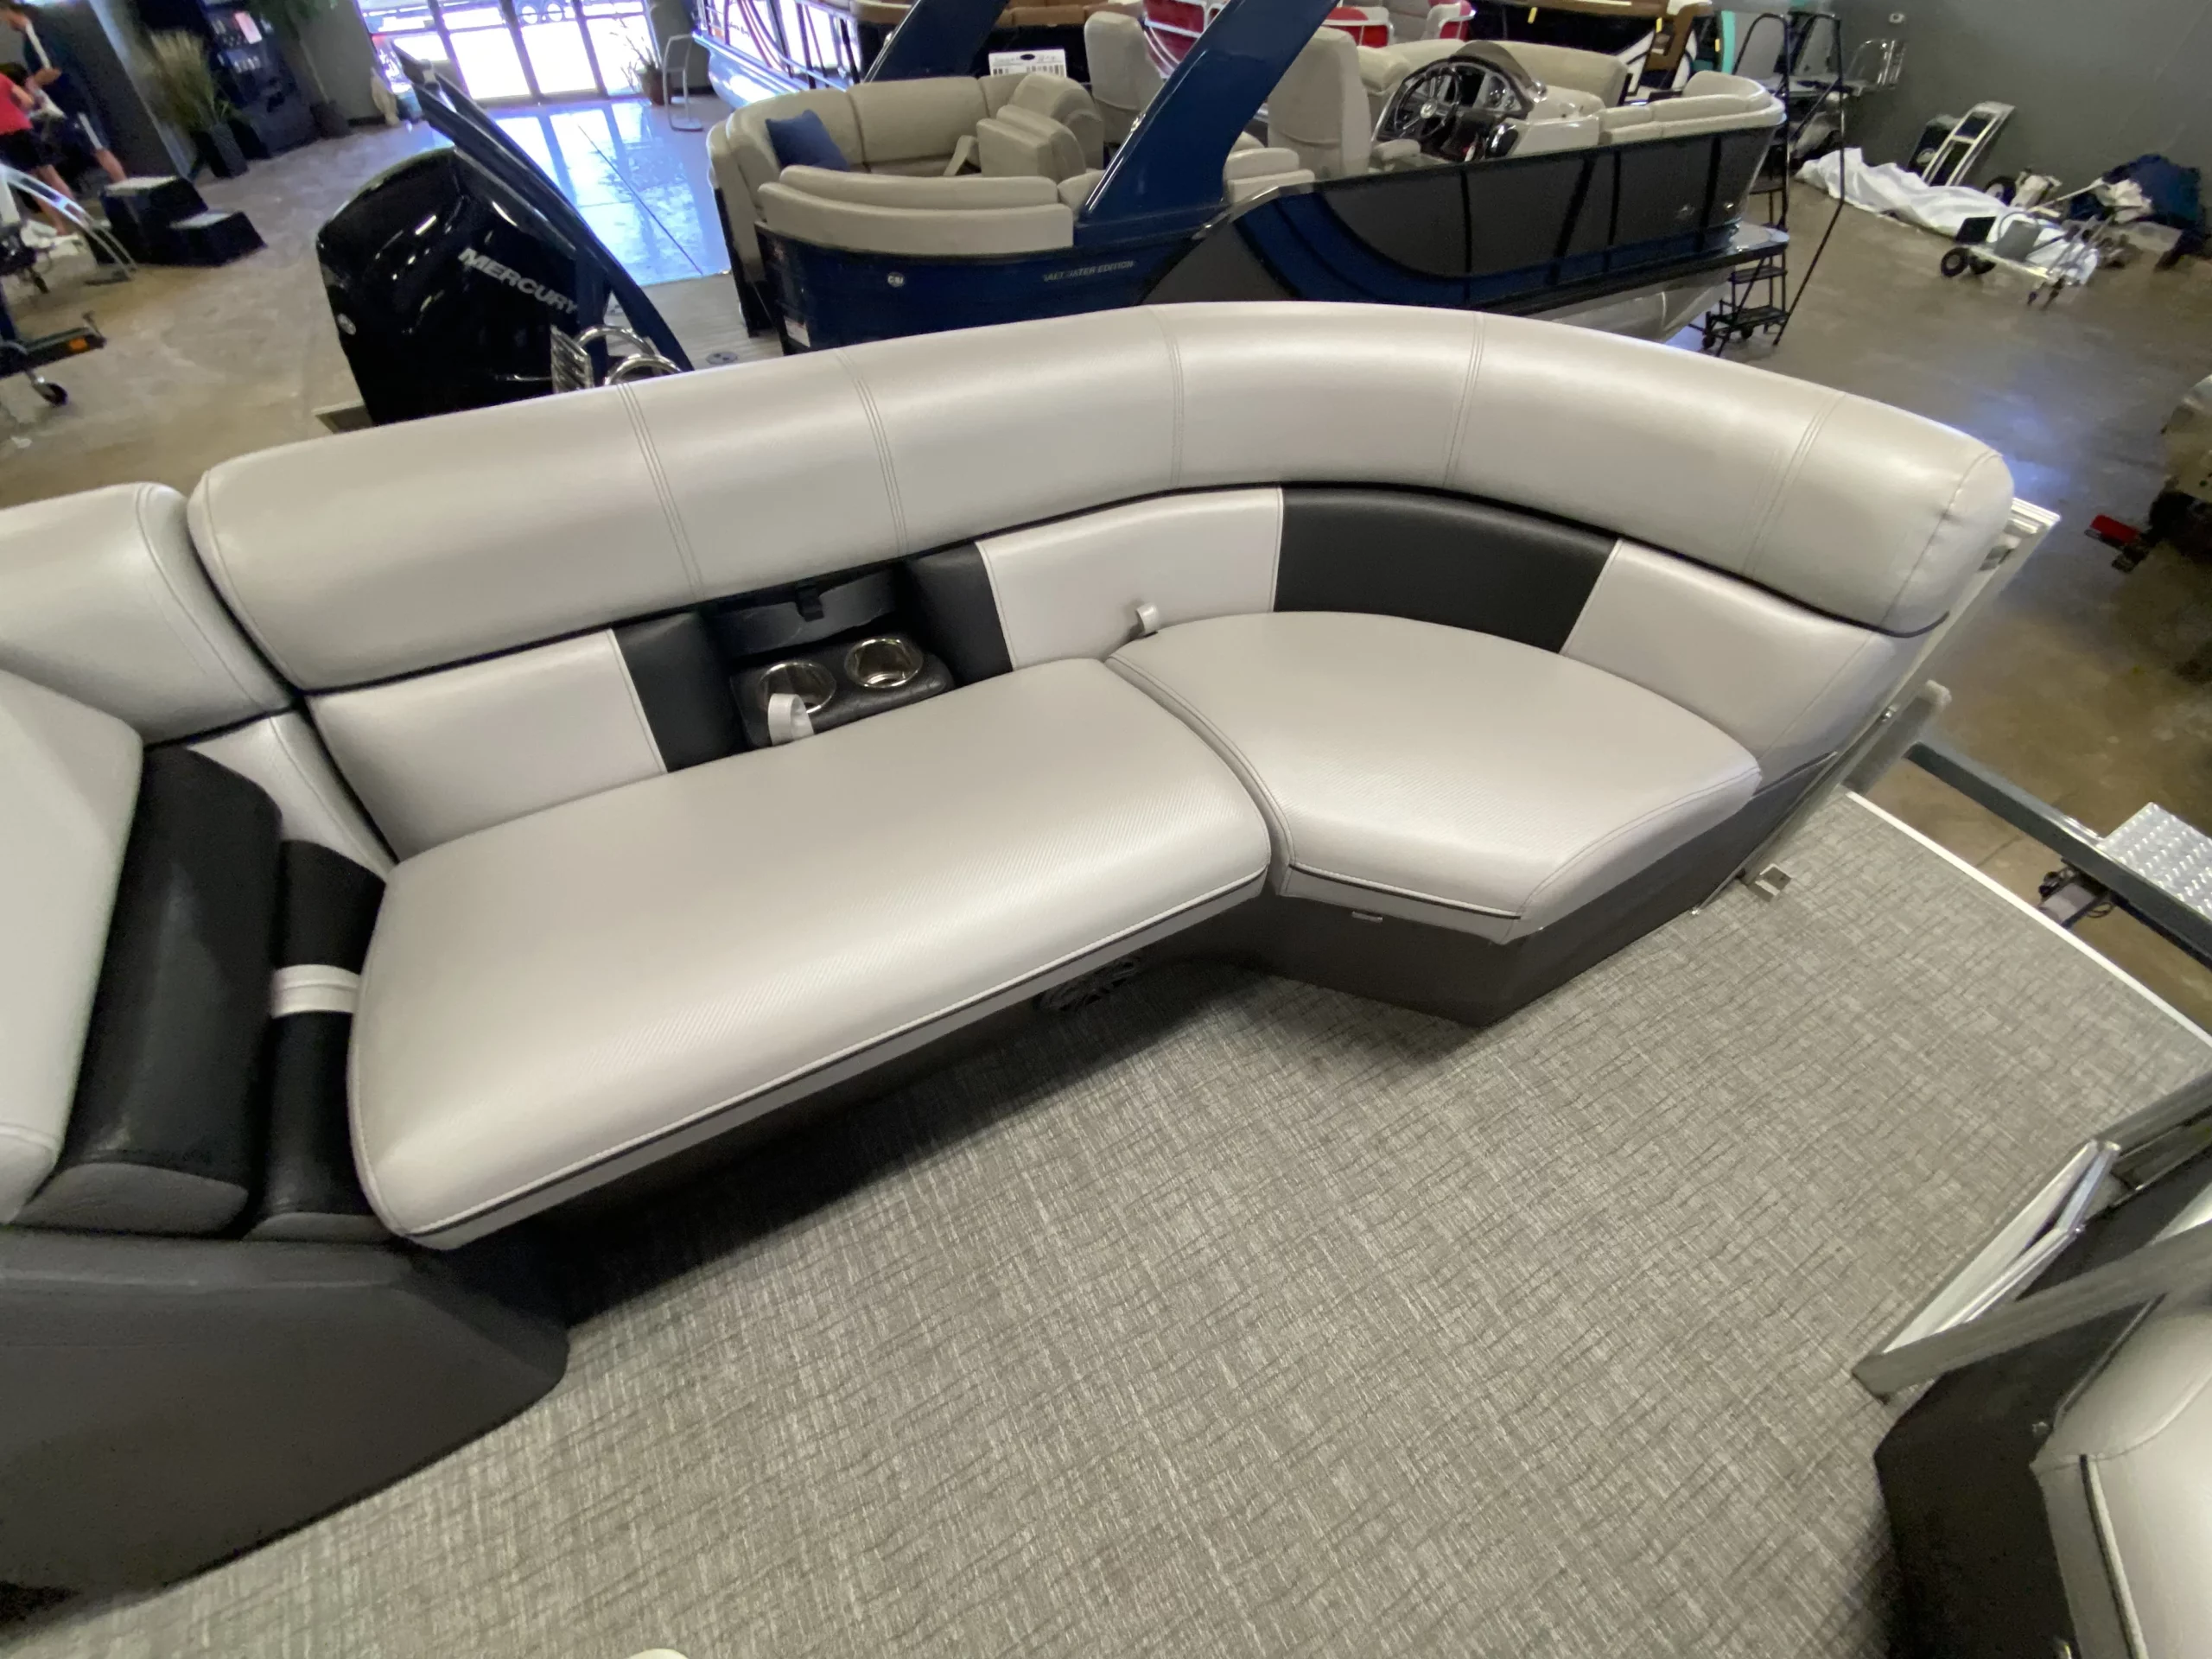 2018 South Bay Pontoon Boat For Sale at Valley Marine